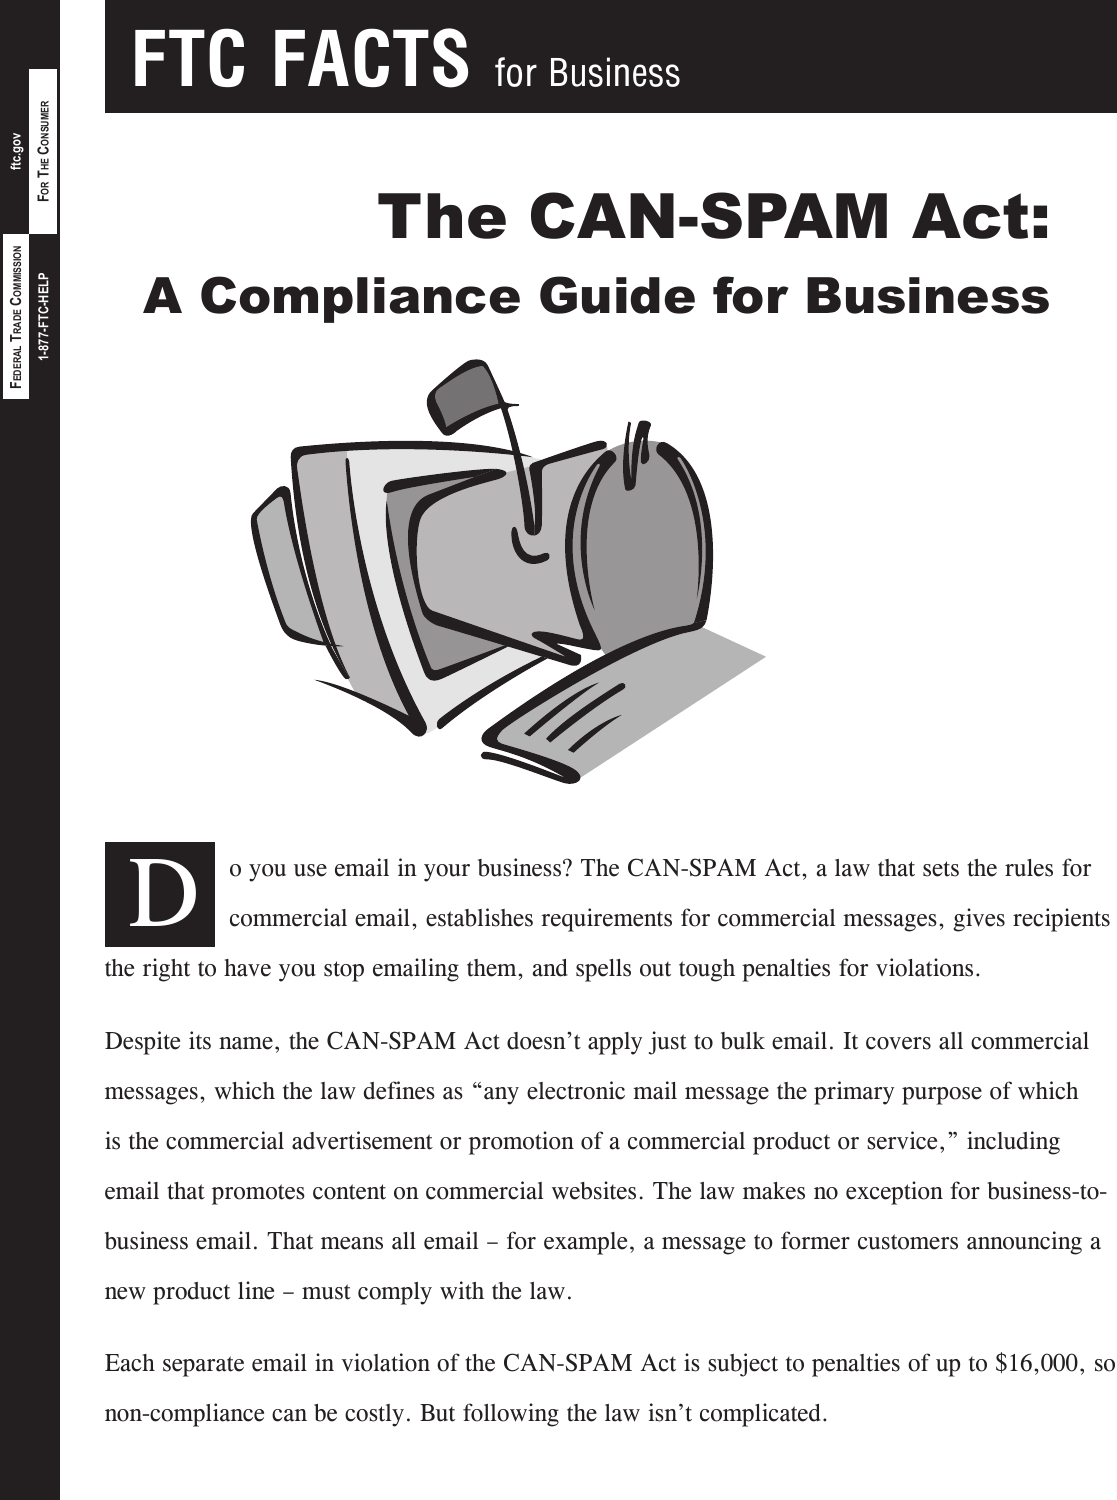 Page 1 of 6 - The CAN-SPAM Act: A Compliance Guide For Business PE Bus61-can-spam-act-compliance-guide-business